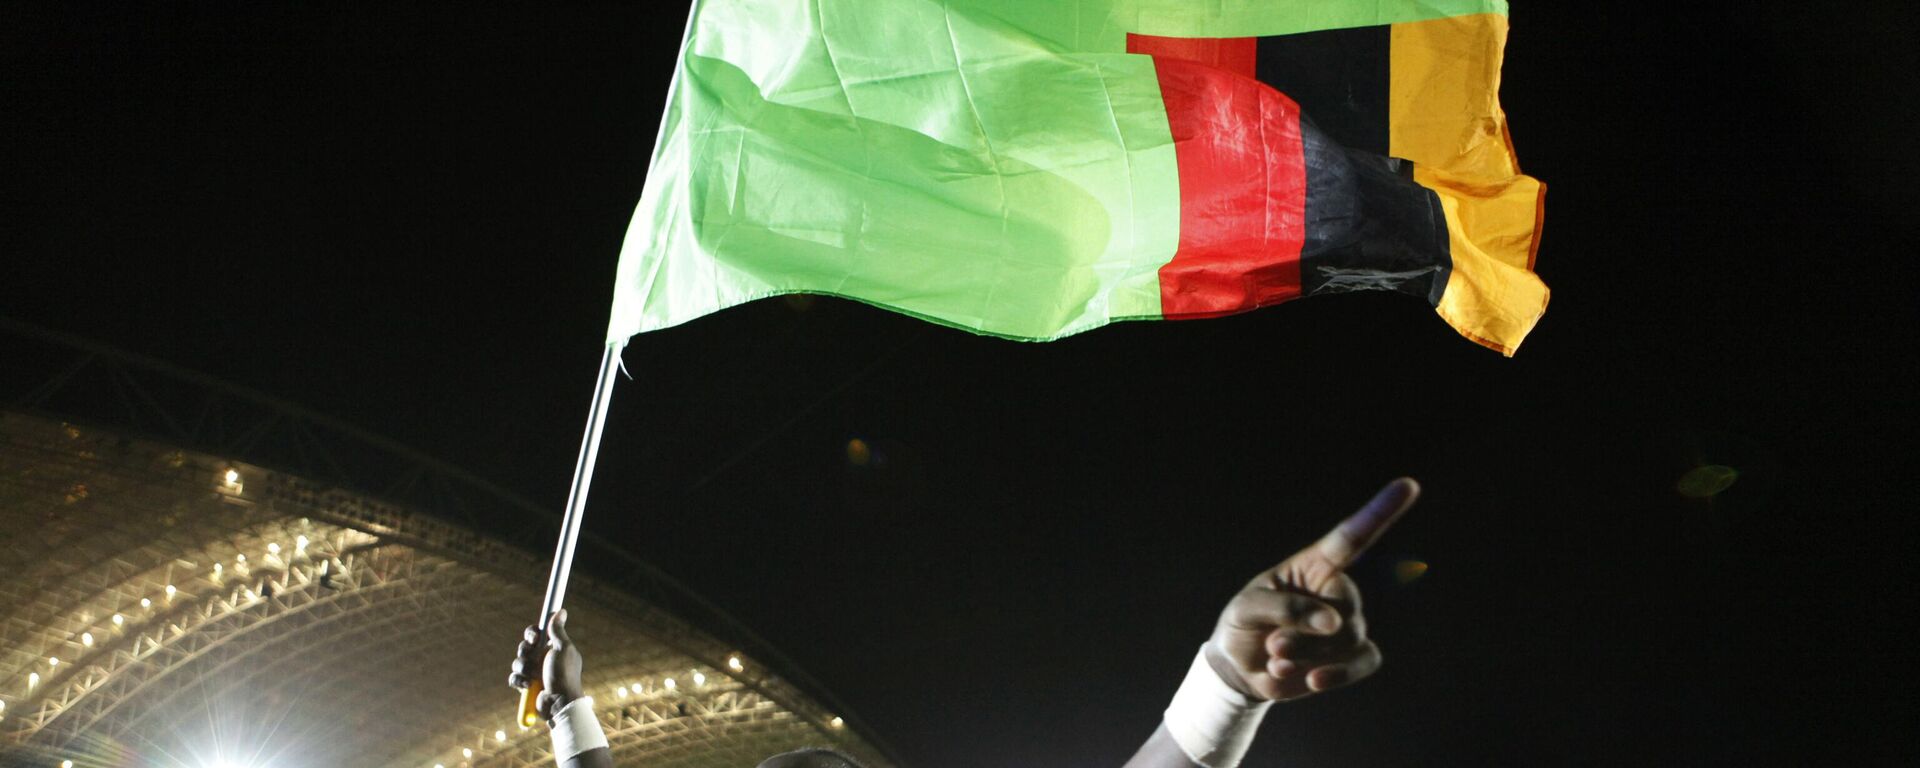 Zambia's goalkeeper Kennedy Mweene carries a Zambia flag as he celebrates his team winning the African Cup of Nations, after beating Ivory Coast in the tournament final soccer match at Stade de l'Amitie in Libreville, Gabon Sunday, Feb. 12, 2012. - Sputnik International, 1920, 12.03.2023